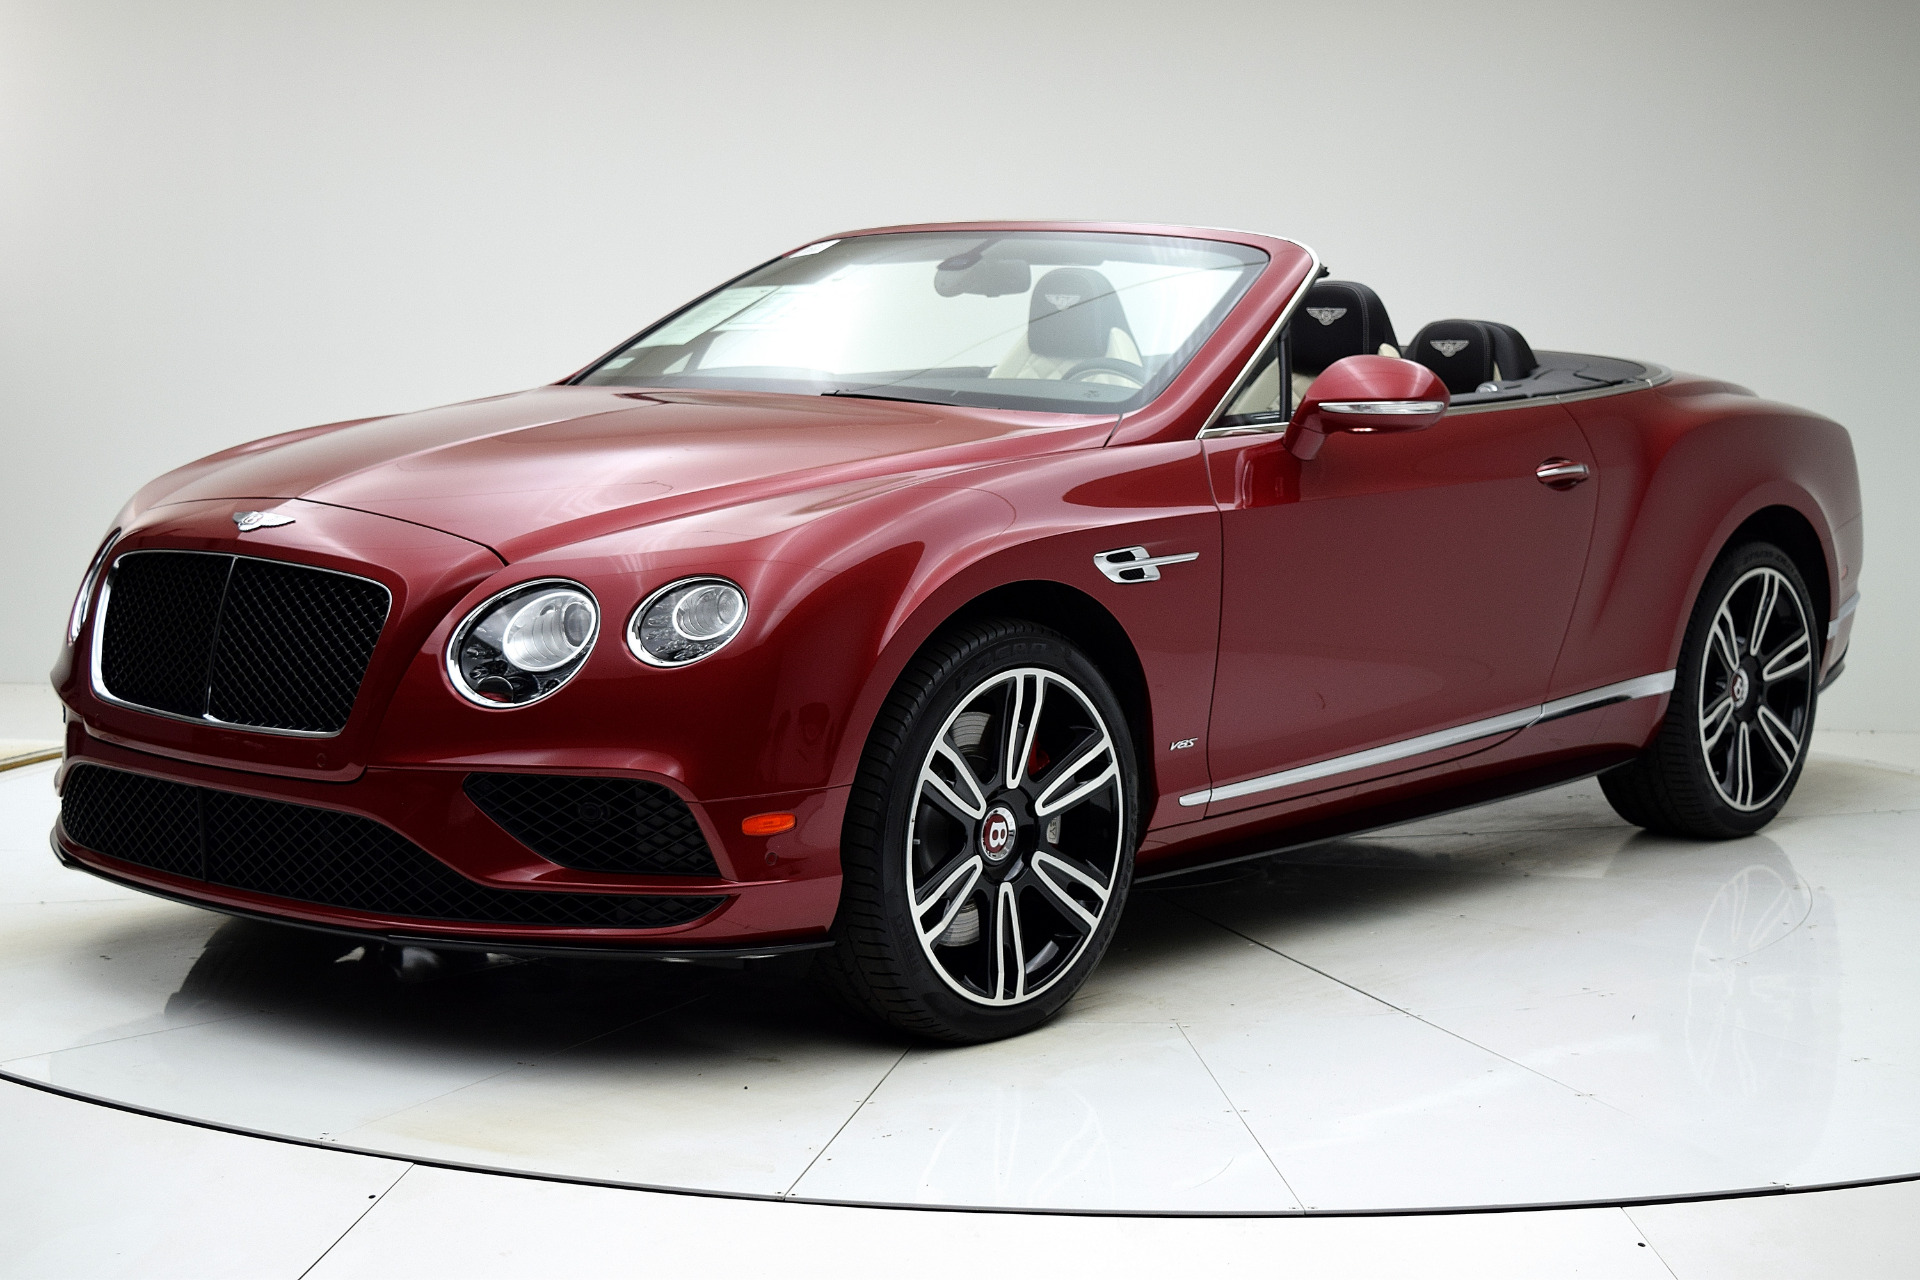 Used 2016 Bentley Continental GT V8 S Convertible for sale Sold at Bentley Palmyra N.J. in Palmyra NJ 08065 2